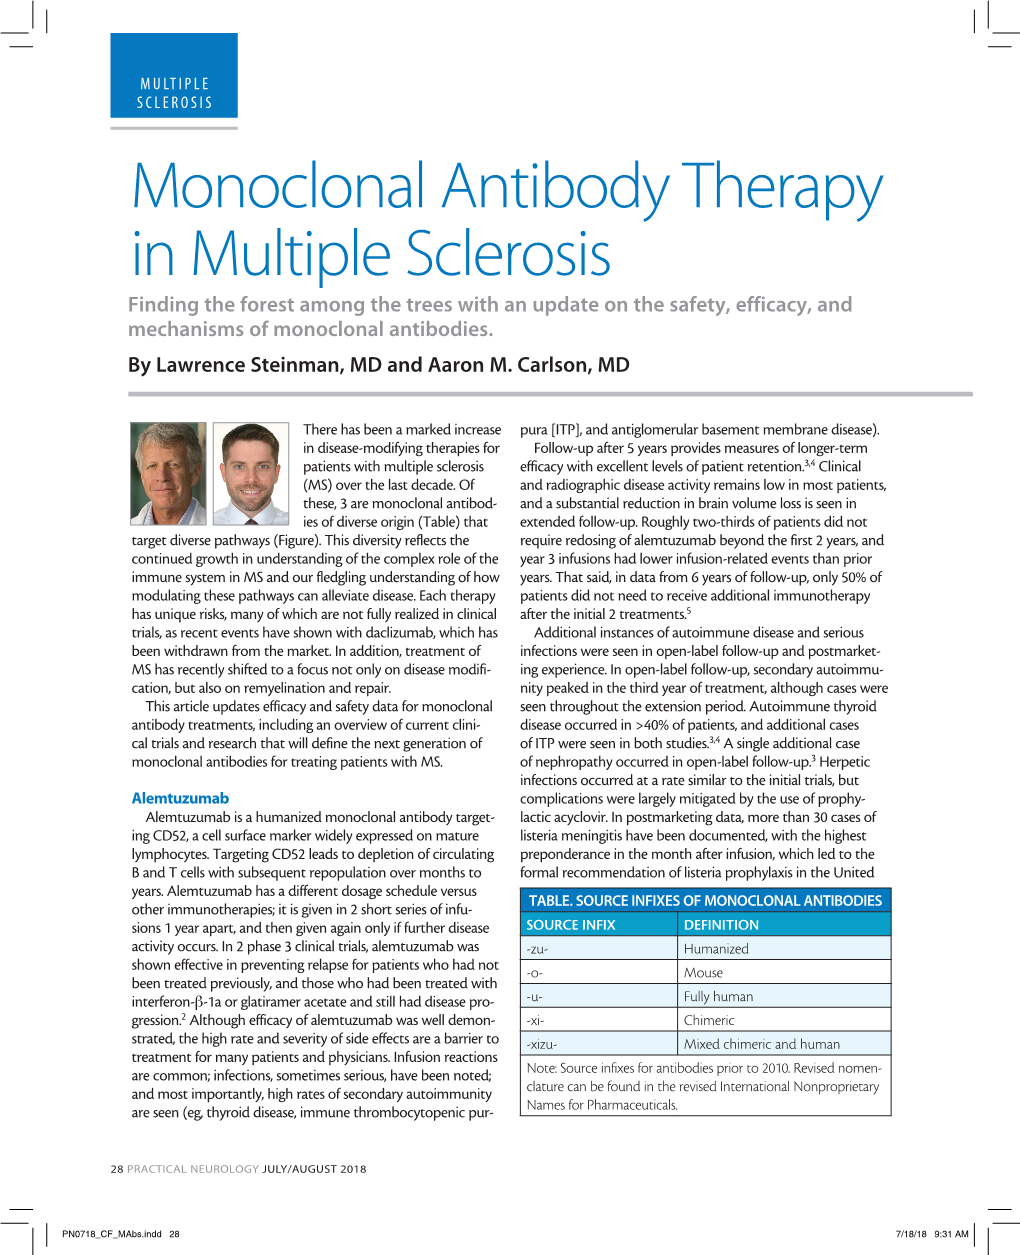 Monoclonal Antibody Therapy in Multiple Sclerosis Finding the Forest Among the Trees with an Update on the Safety, Efficacy, and Mechanisms of Monoclonal Antibodies